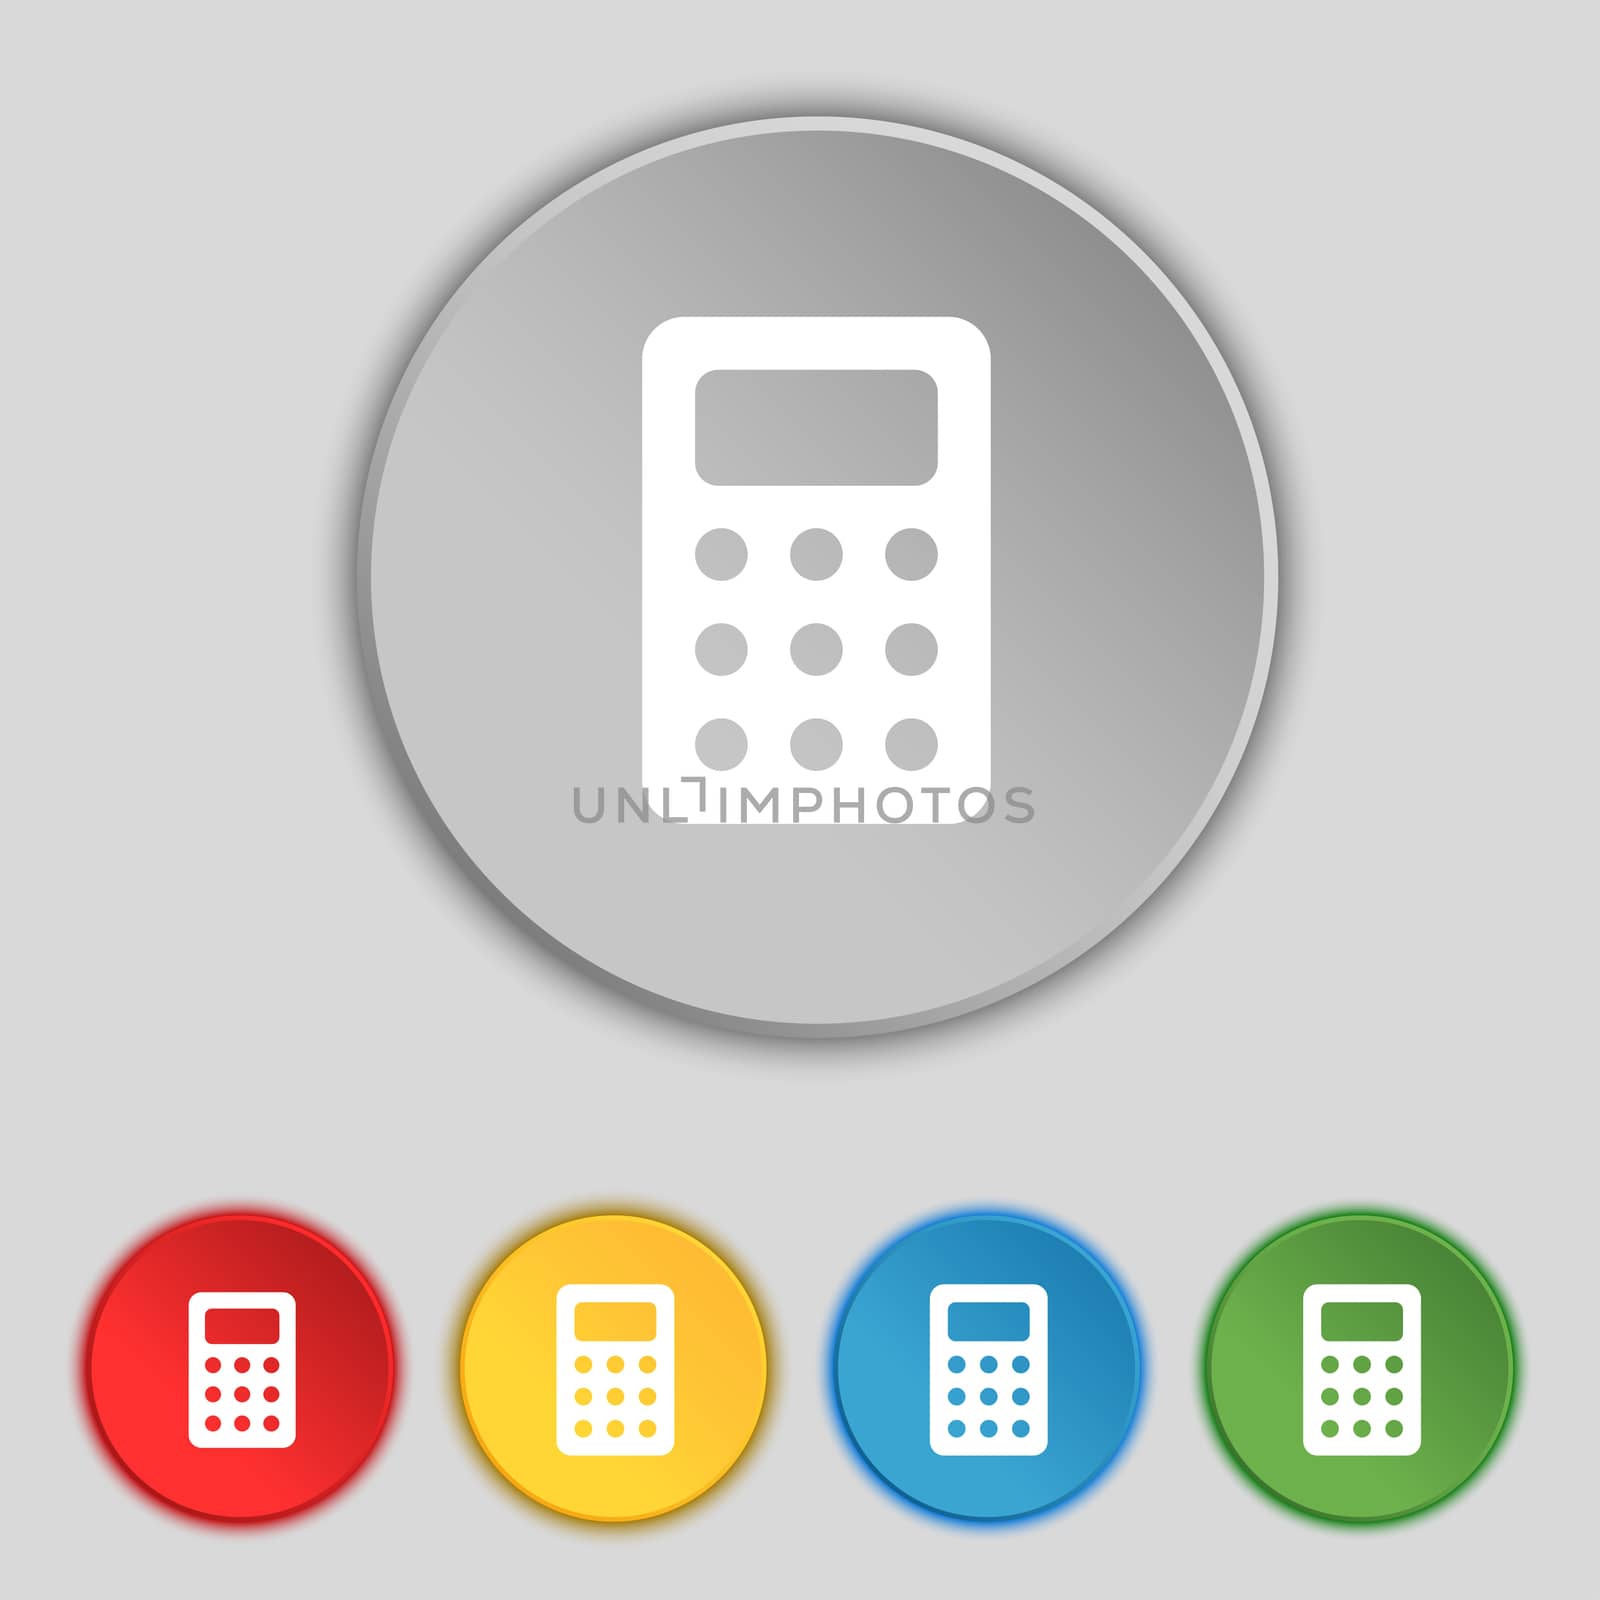 Calculator, Bookkeeping icon sign. Symbol on five flat buttons. illustration